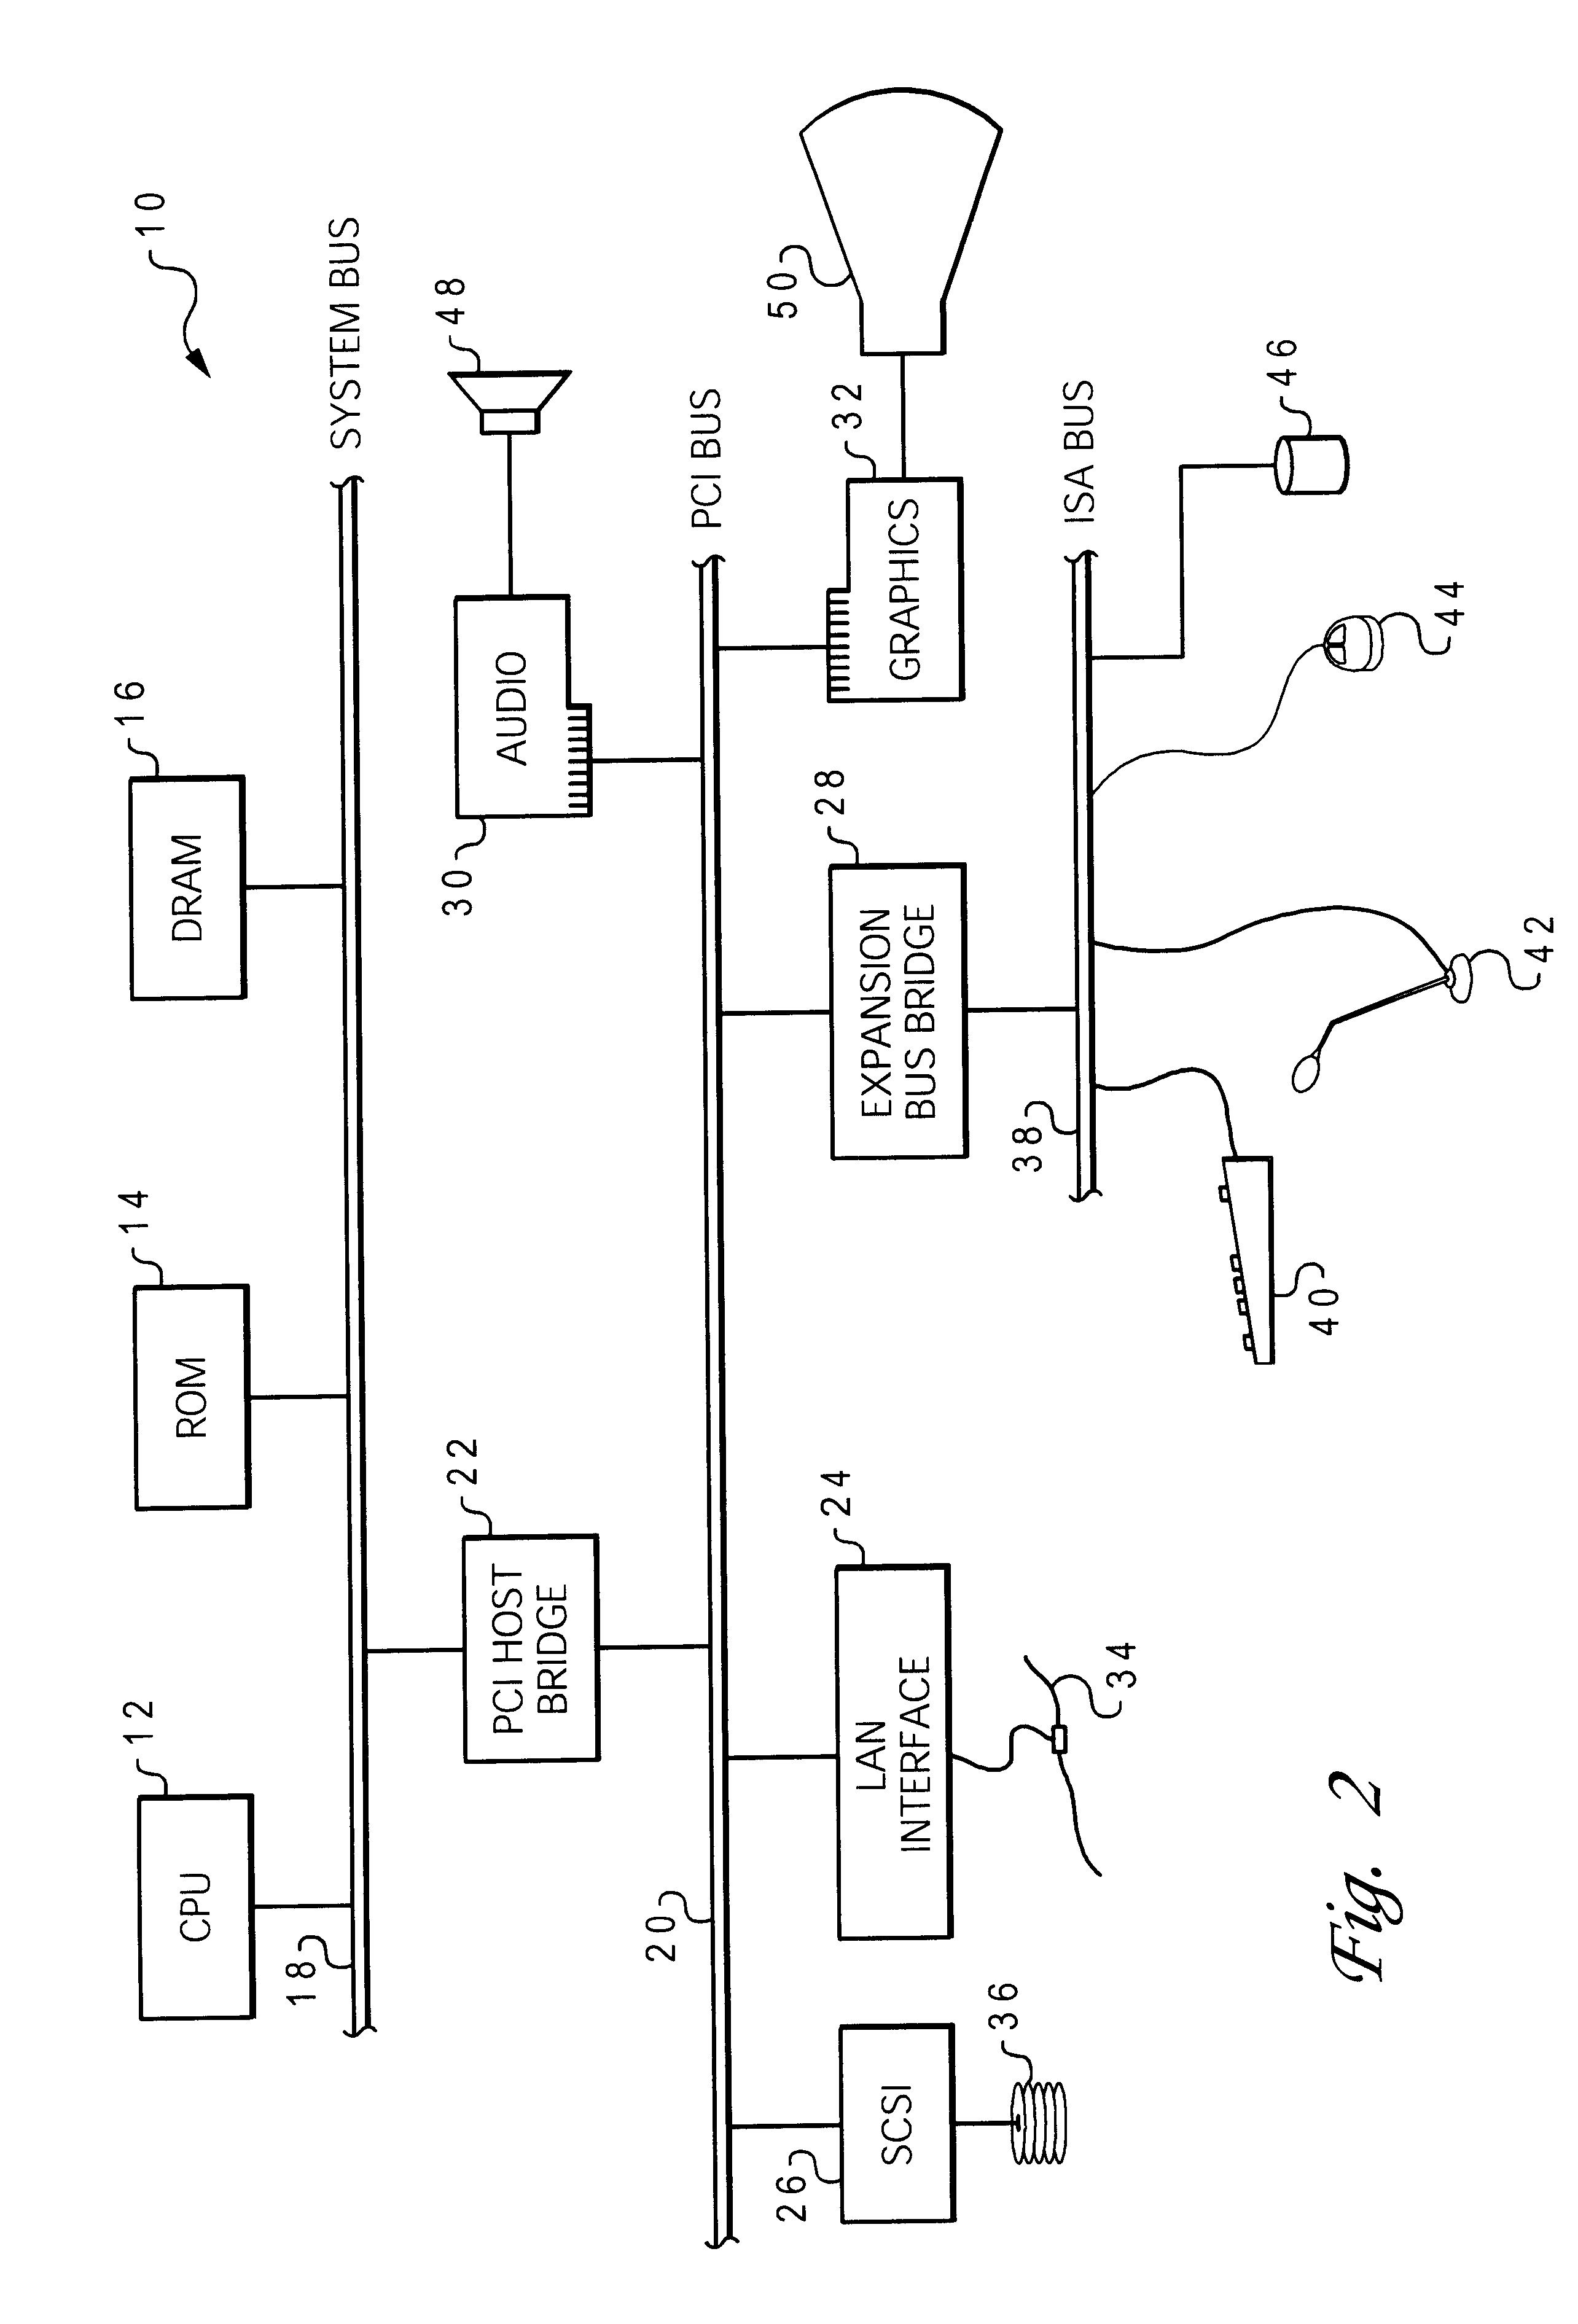 Analytical constraint generation for cut-based global placement